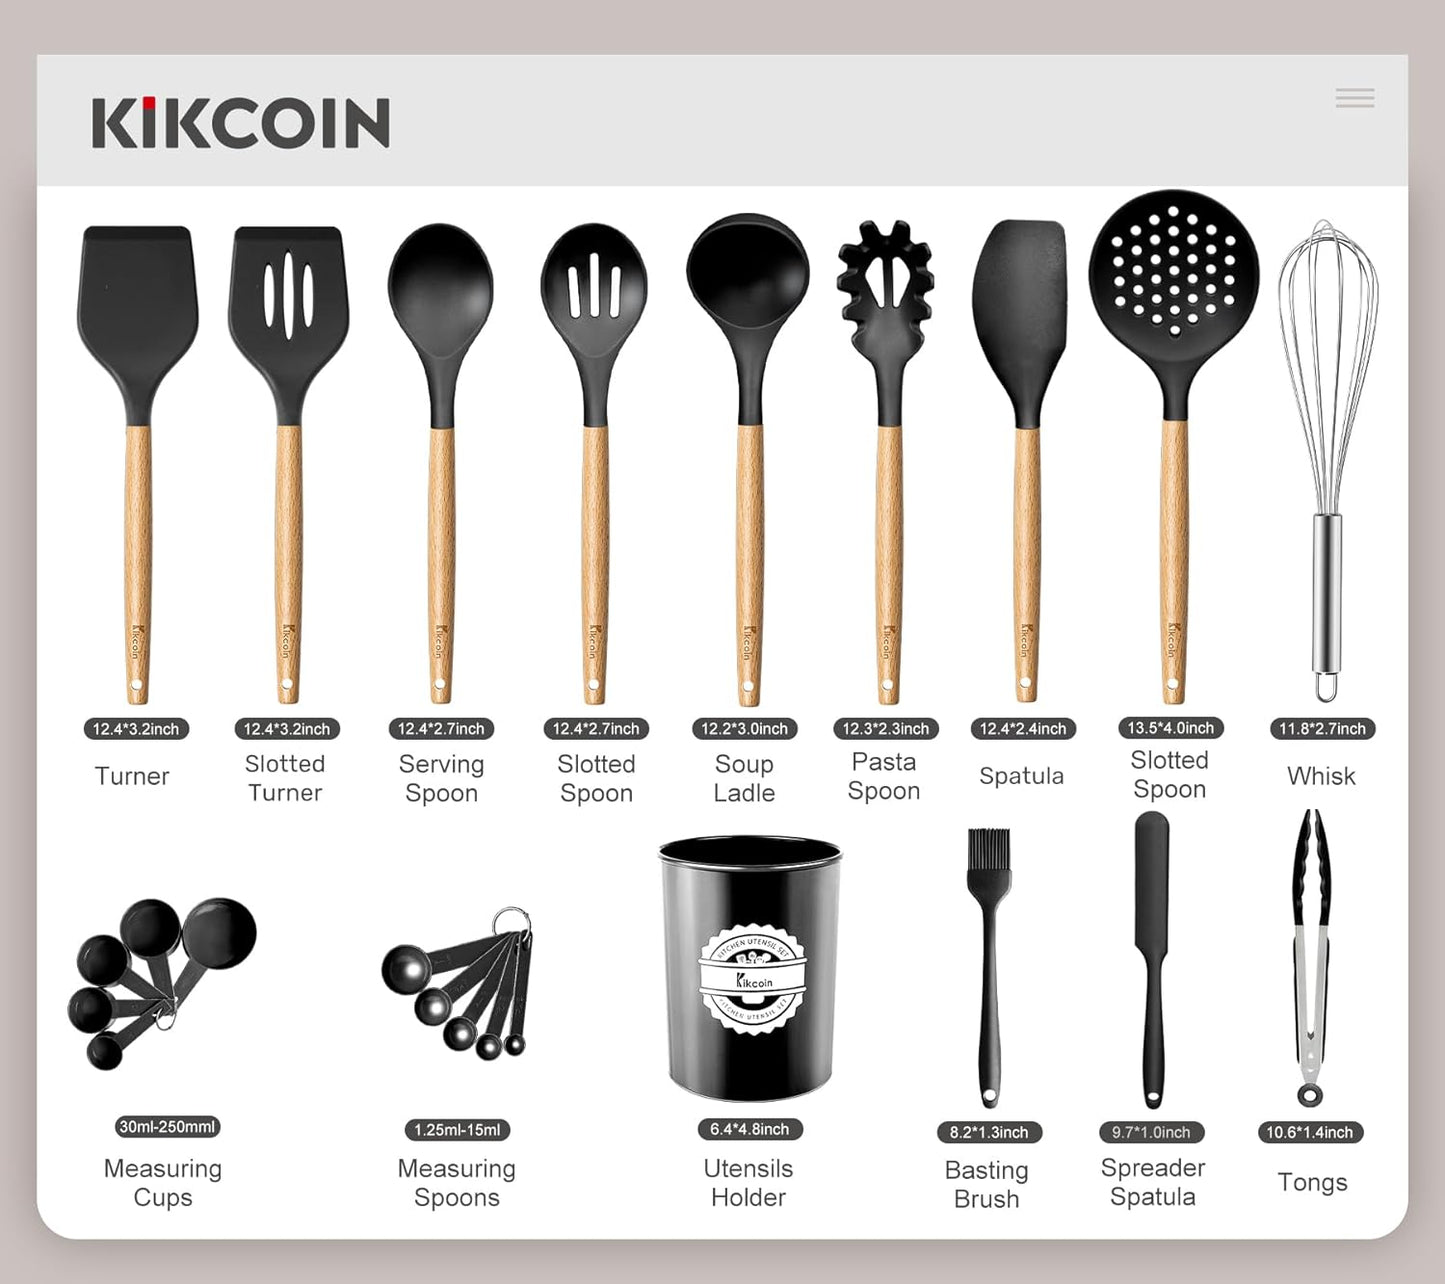 23 PCS Kitchen Utensils Set, Kikcoin Wood Handle Silicone Cooking Utensils Set with Holder, Spatulas Silicone Heat Resistant Cooking Gadgets for Nonstick Cookware, Black